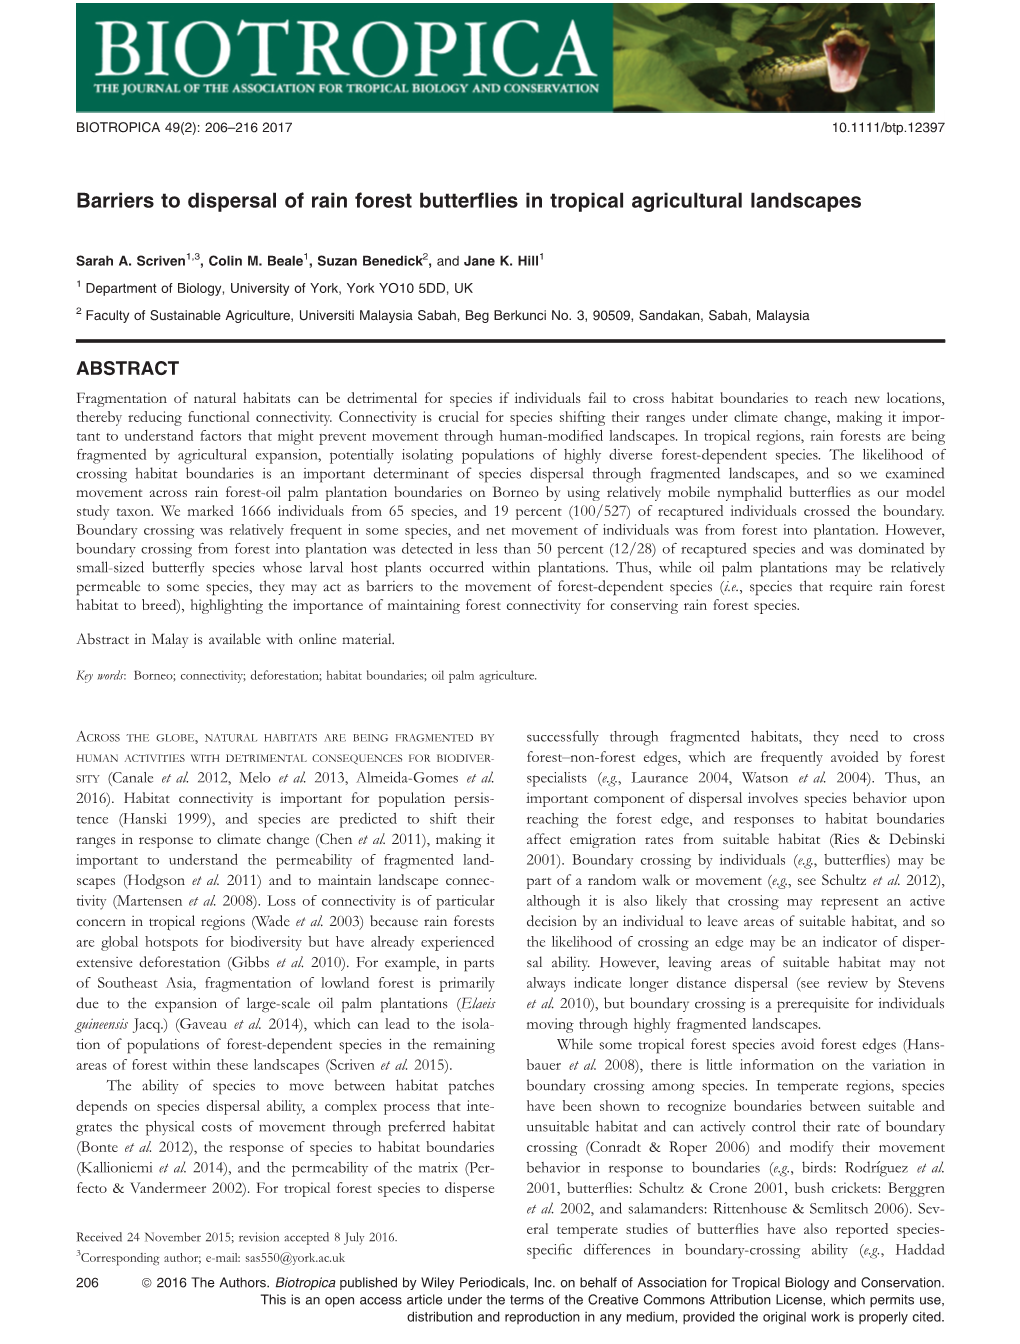 Barriers to Dispersal of Rain Forest Butterflies in Tropical Agricultural